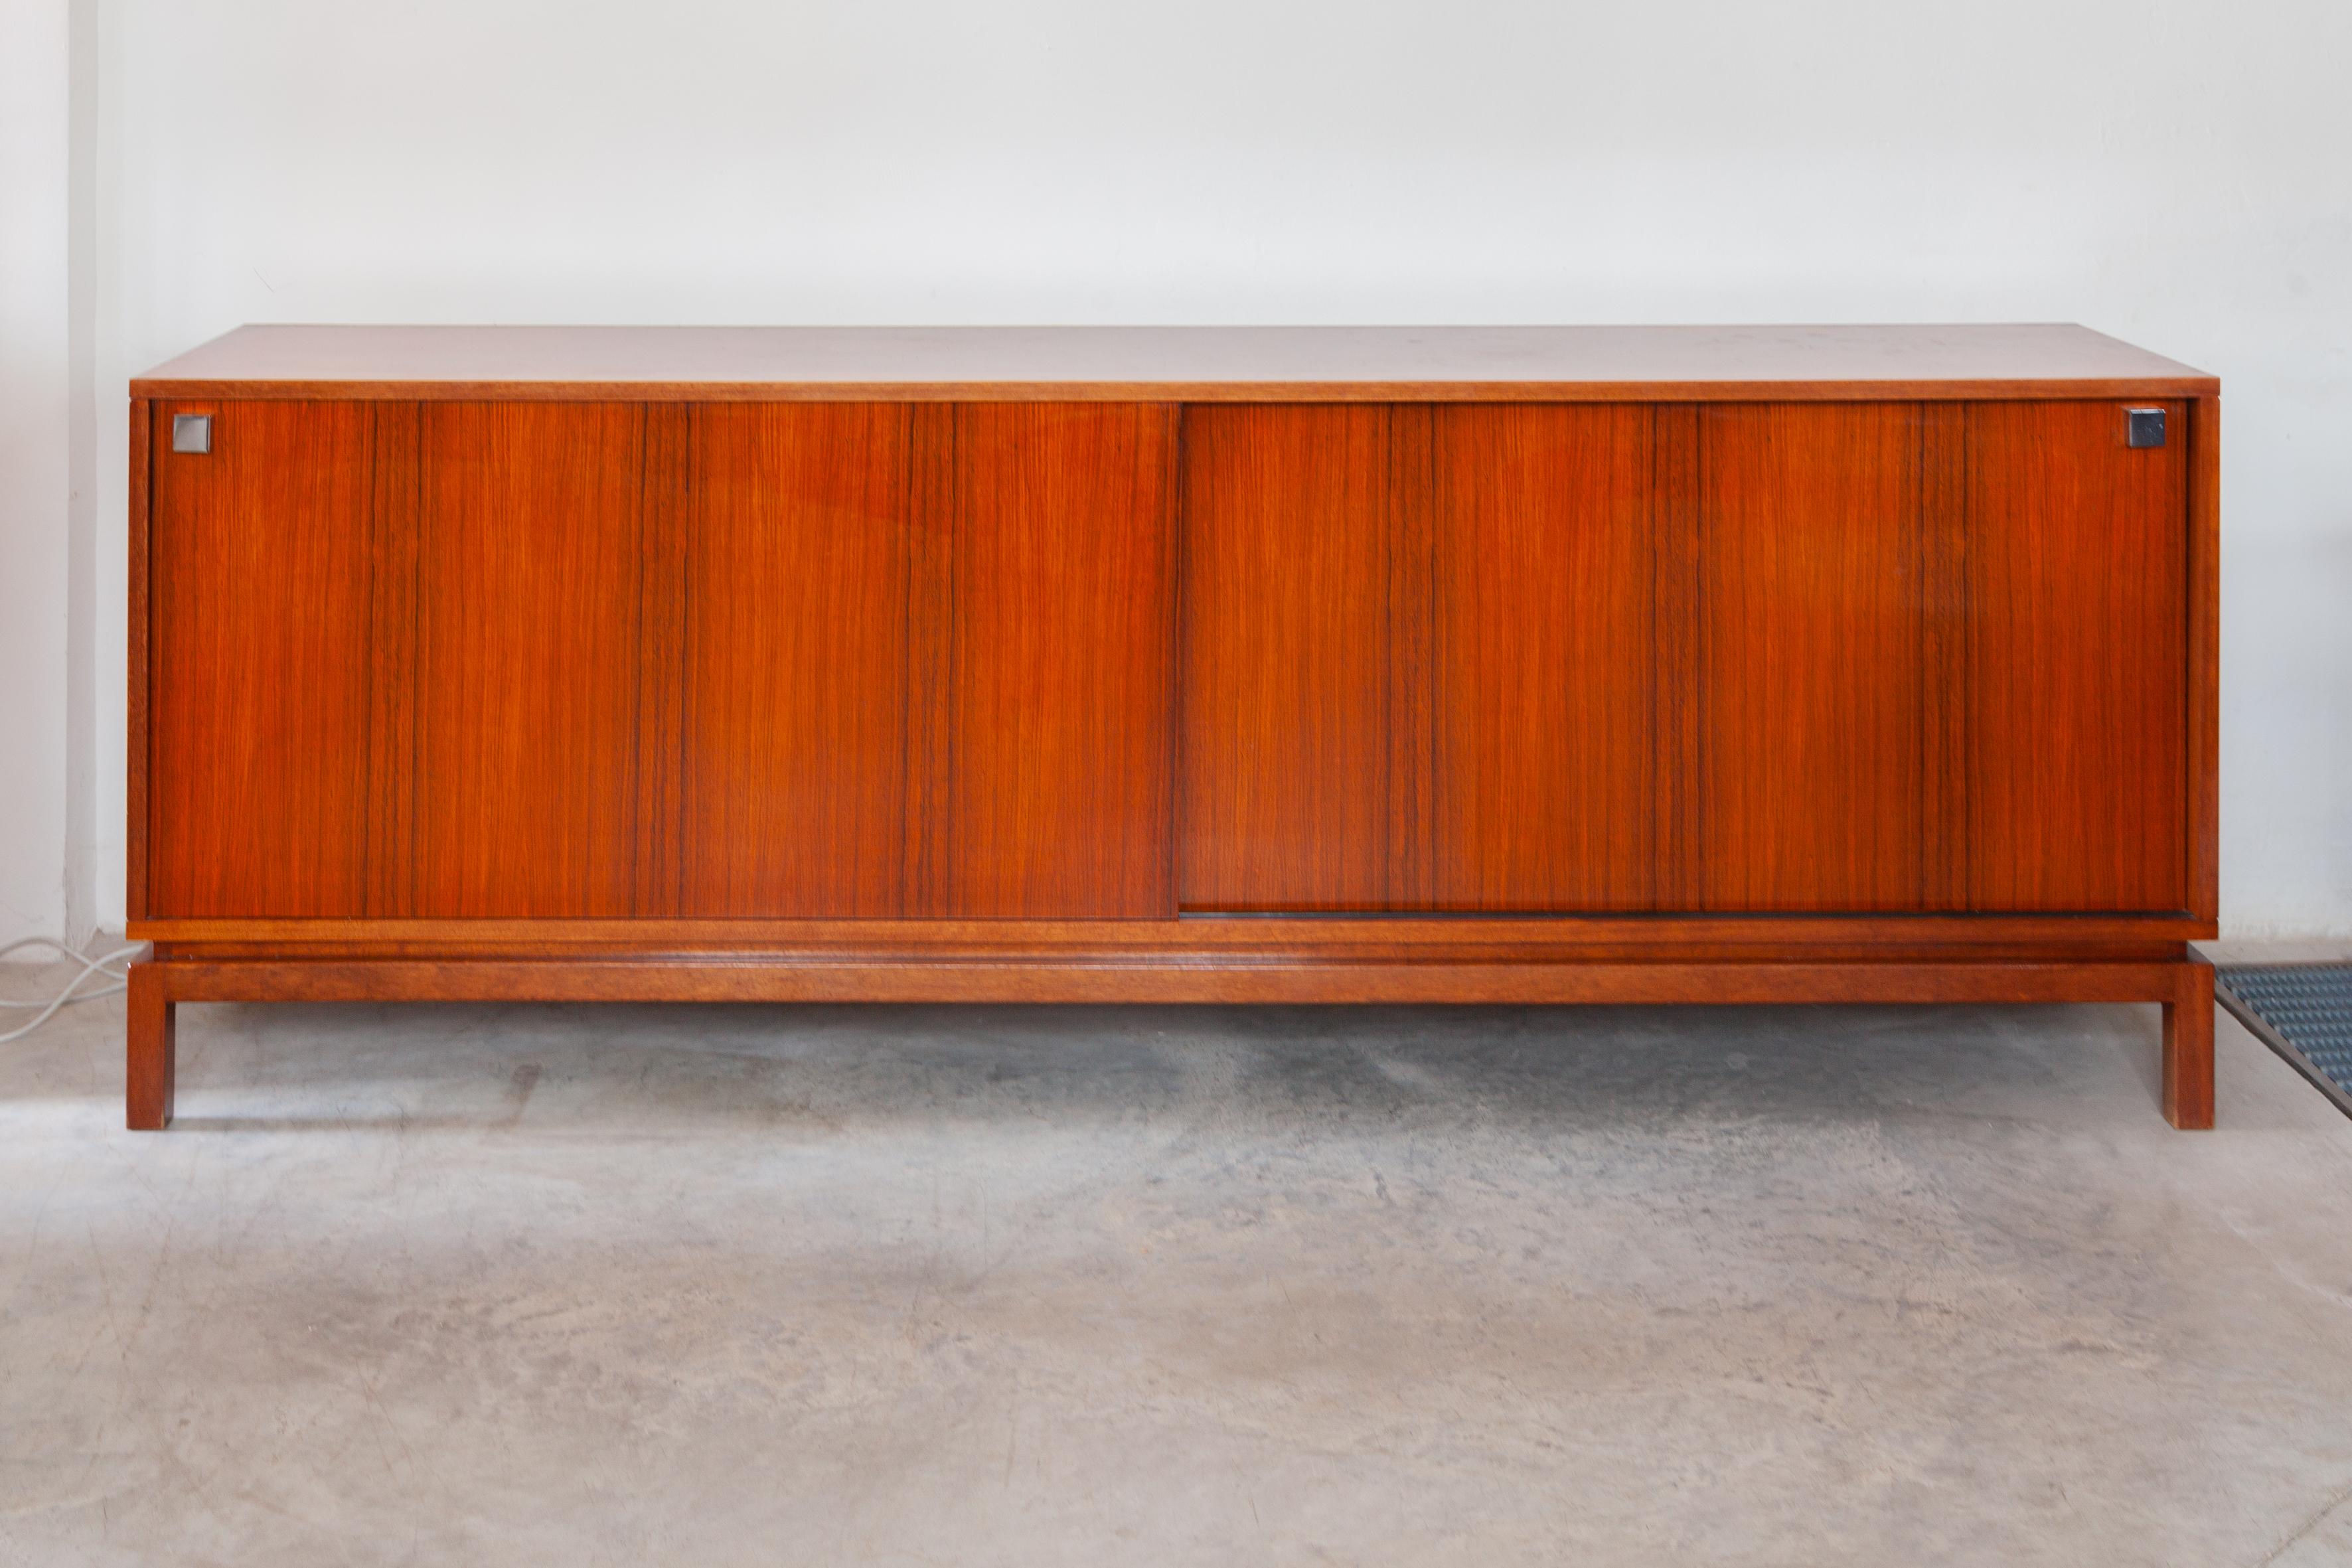 A large sideboard designed by the Belgian architect Alfred Hendrickx 1960, a minimalist sideboard of high quality and craftsmanship in Zingana wood consistently straight lines emphasize minimalism in its strength. The interior consists symmetrically